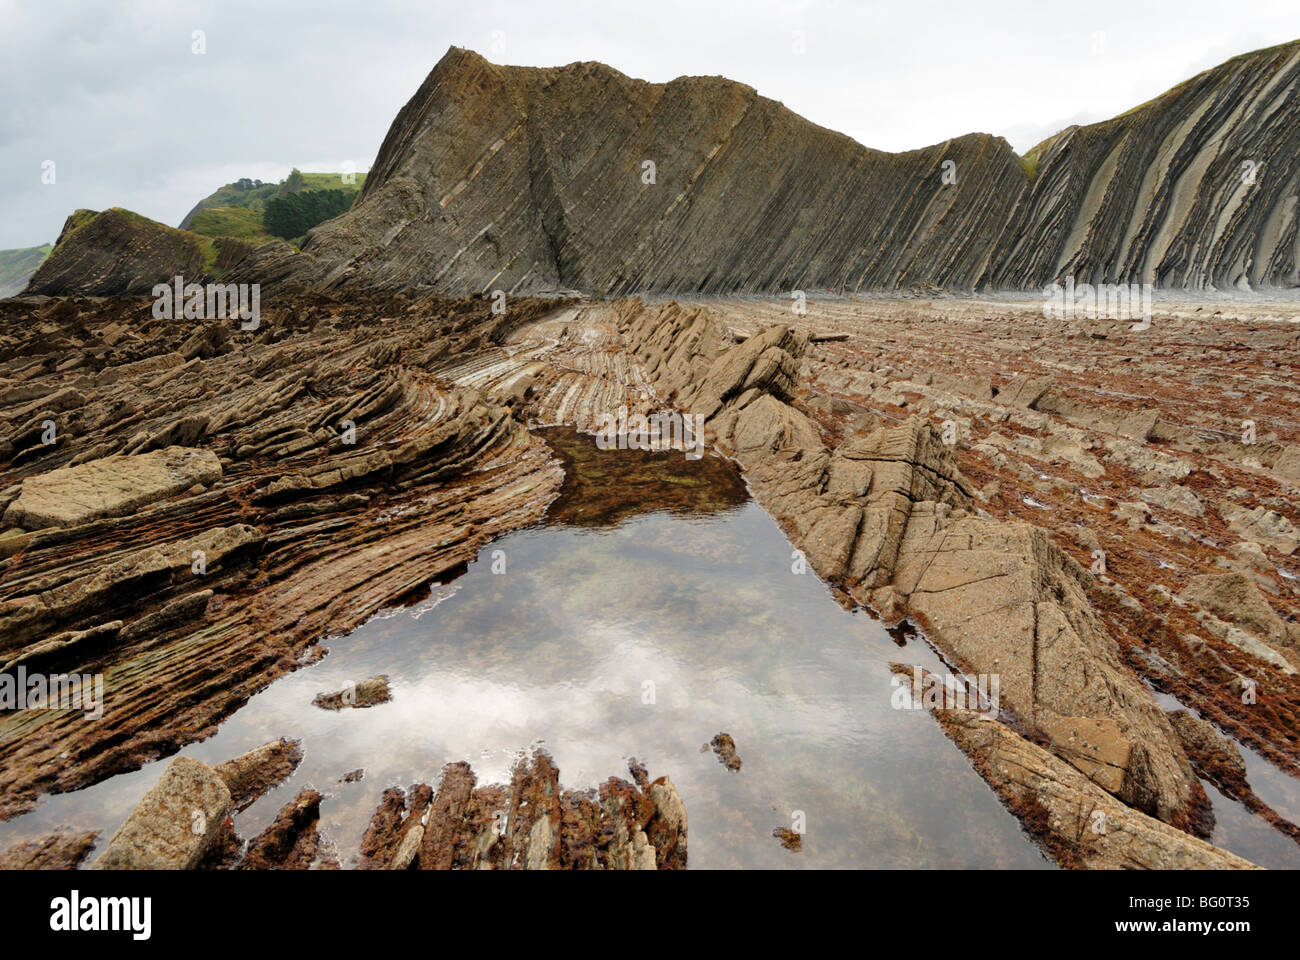 Rock formations (flysch) at low tide on coast between Zumaia and Deba, Costa Vasca, Basque country, Euskadi, Spain, Europe Stock Photo